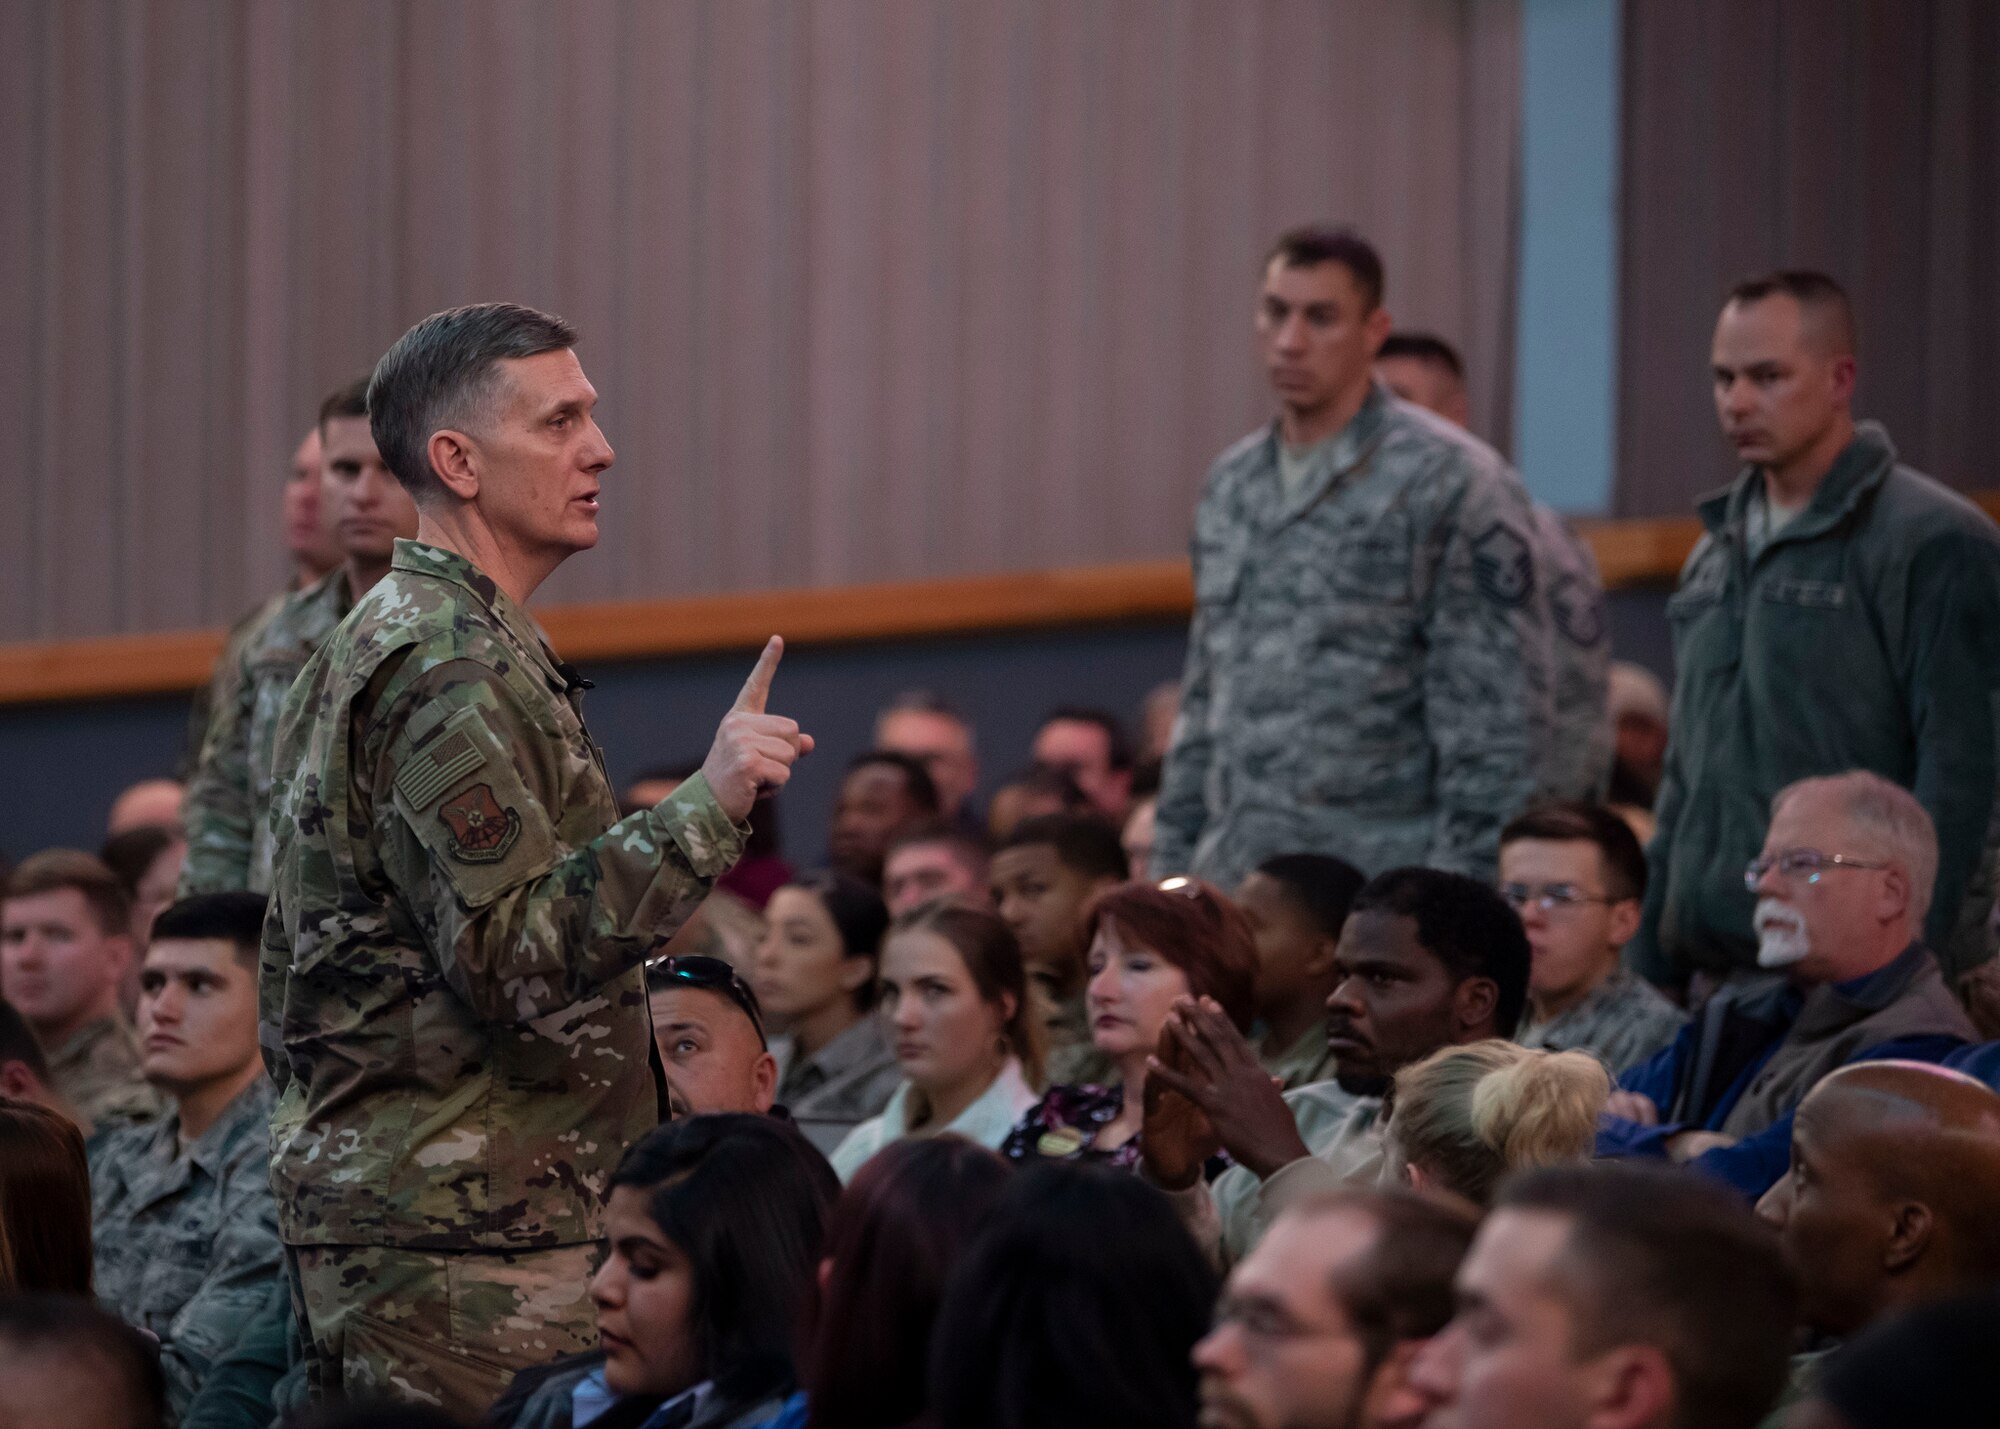 Air Force Global Strike Command commander Gen. Timothy Ray addresses Airmen during an all call at Kirtland Air Force Base, N.M., Feb. 20, 2019. The general made a two-day visit to the base and Kirtland’s 377th ABW, having meals with 377th ABW Airmen, receiving briefings and meeting with wing leadership and key spouses. (U.S. Air Force photo by Staff Sgt. J.D. Strong II)